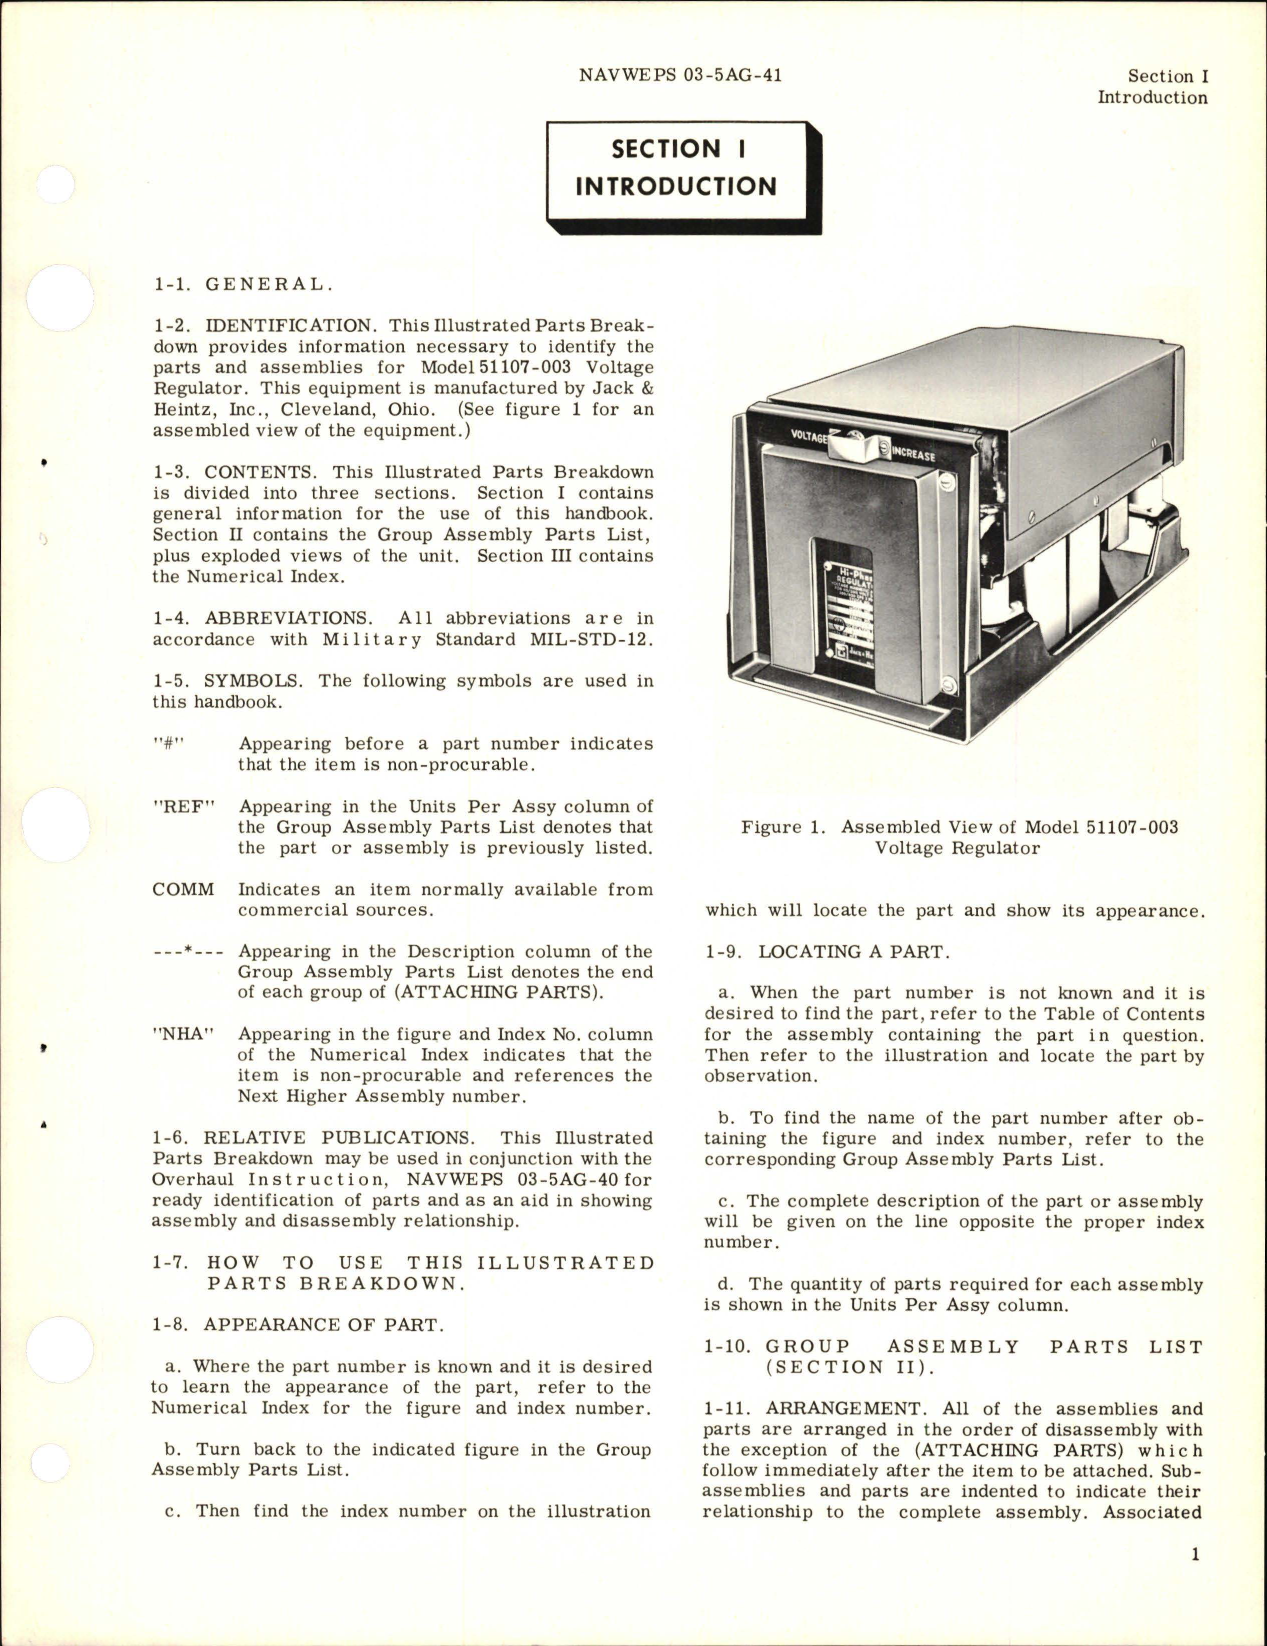 Sample page 5 from AirCorps Library document: Illustrated Parts Breakdown for Voltage Regulator - Model 51107-003